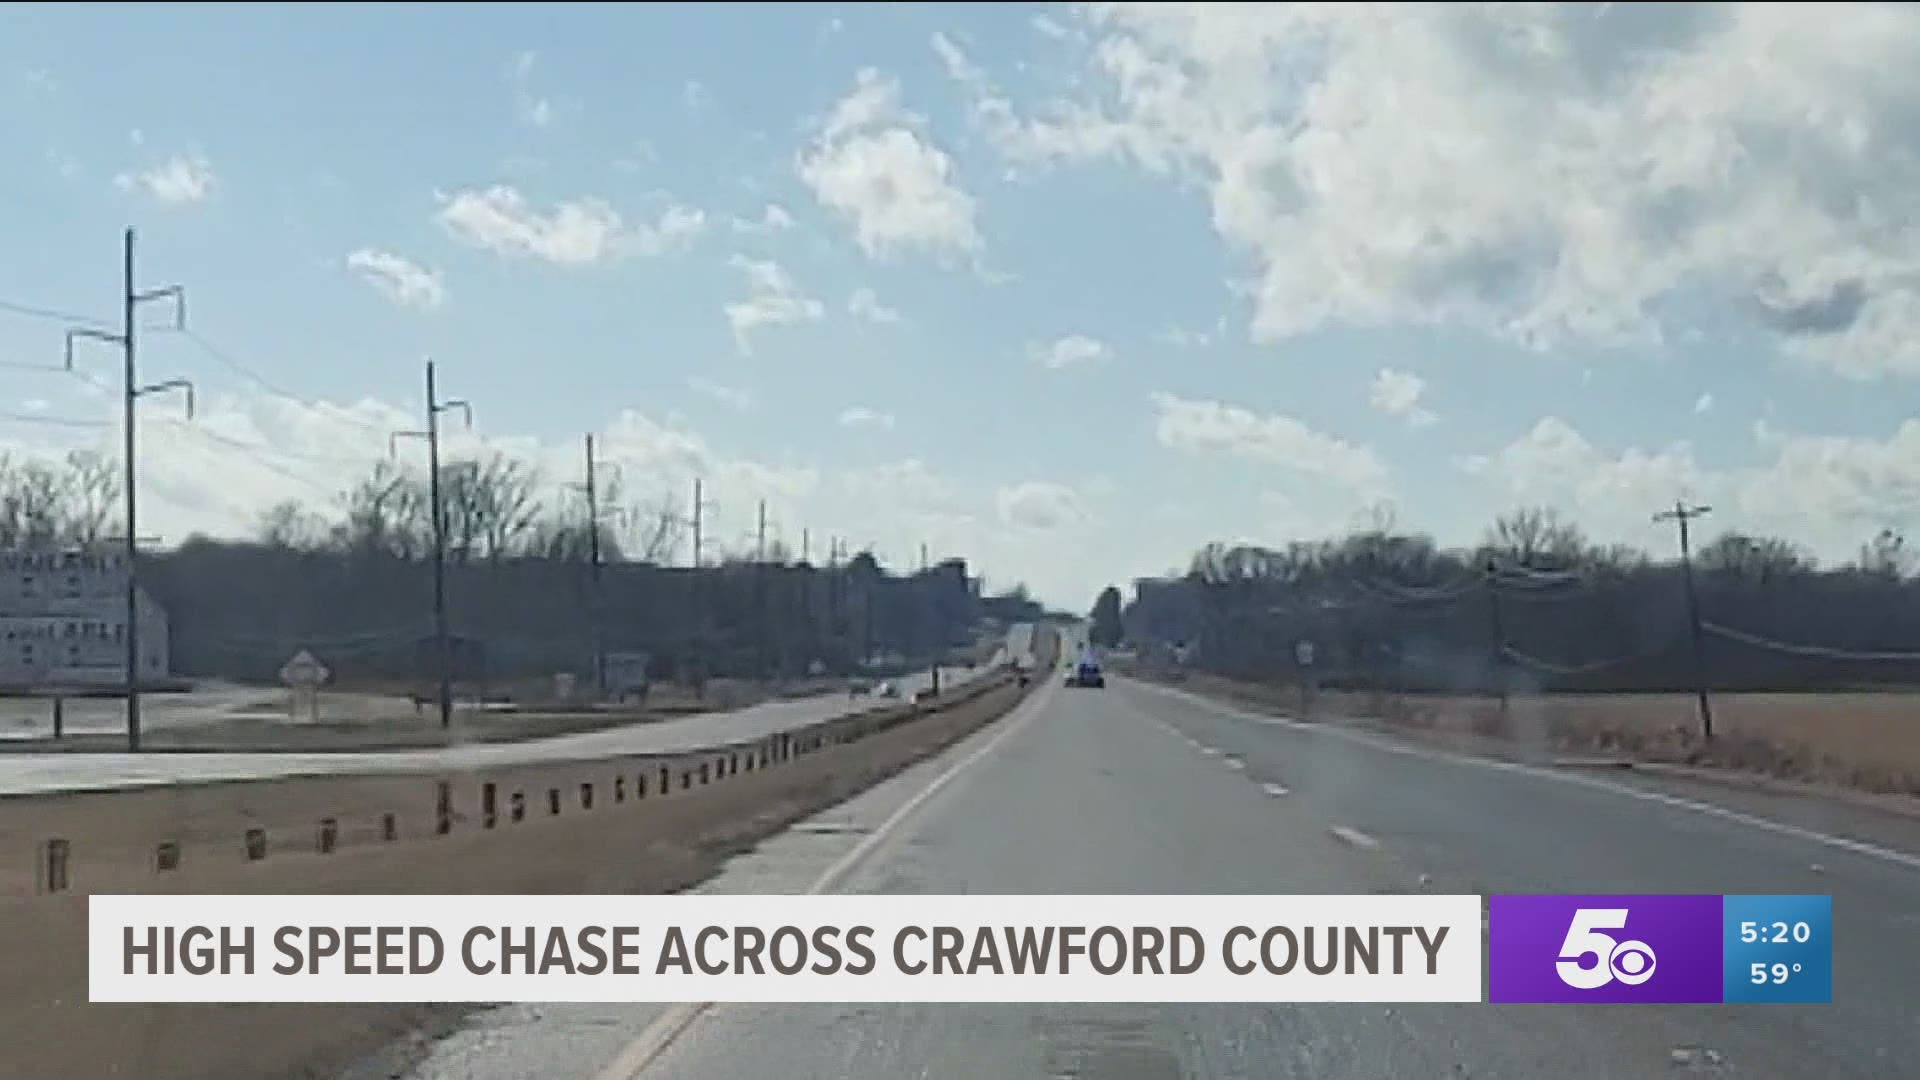 A suspect led multiple police agencies on a high-speed police chase through Crawford County earlier today (Jan. 30).